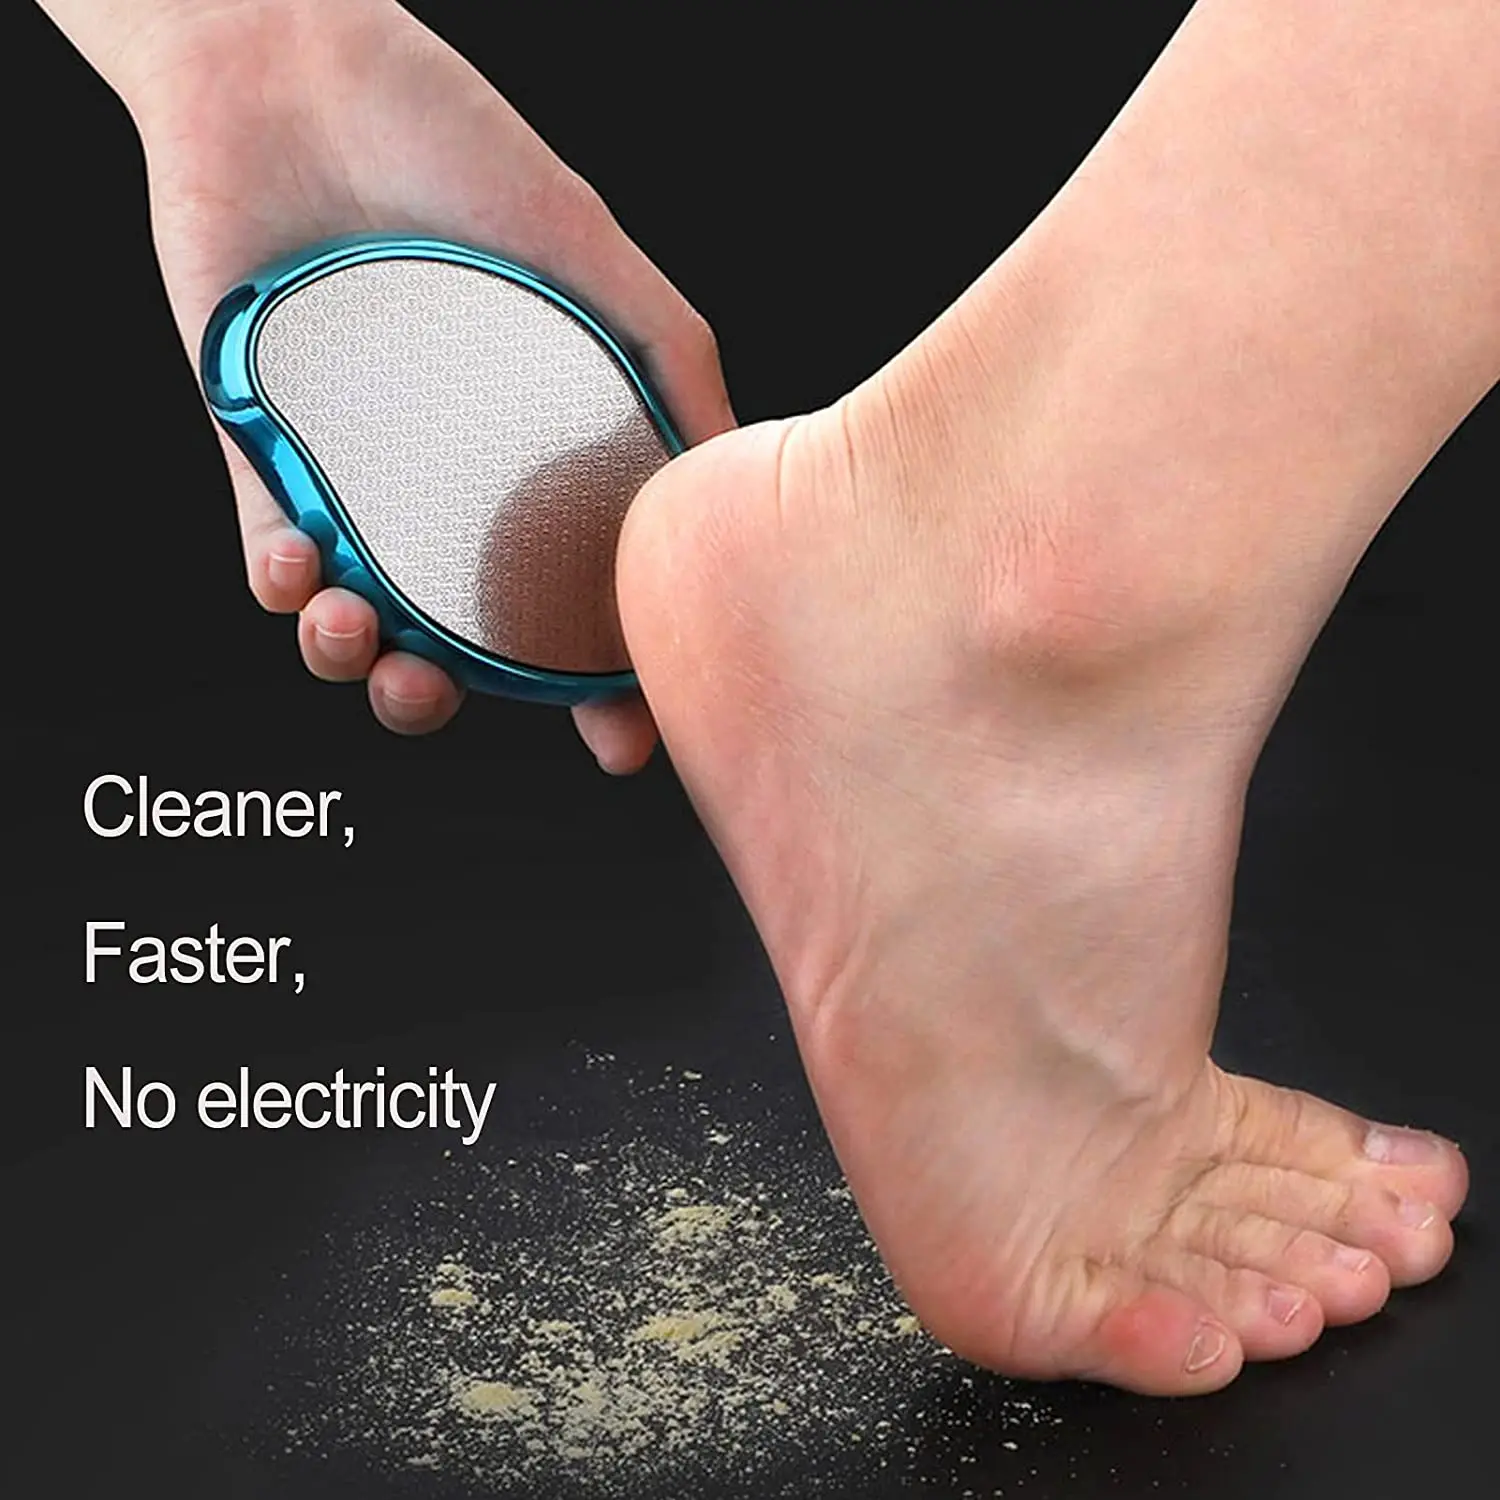 https://ae01.alicdn.com/kf/Sf3a204304dd740db94a4f6dd6b34bde4V/Nano-Glass-Callus-Remover-Portable-Handheld-Foot-File-For-Dry-and-Dry-Skin-Wet-and-Dry.jpg